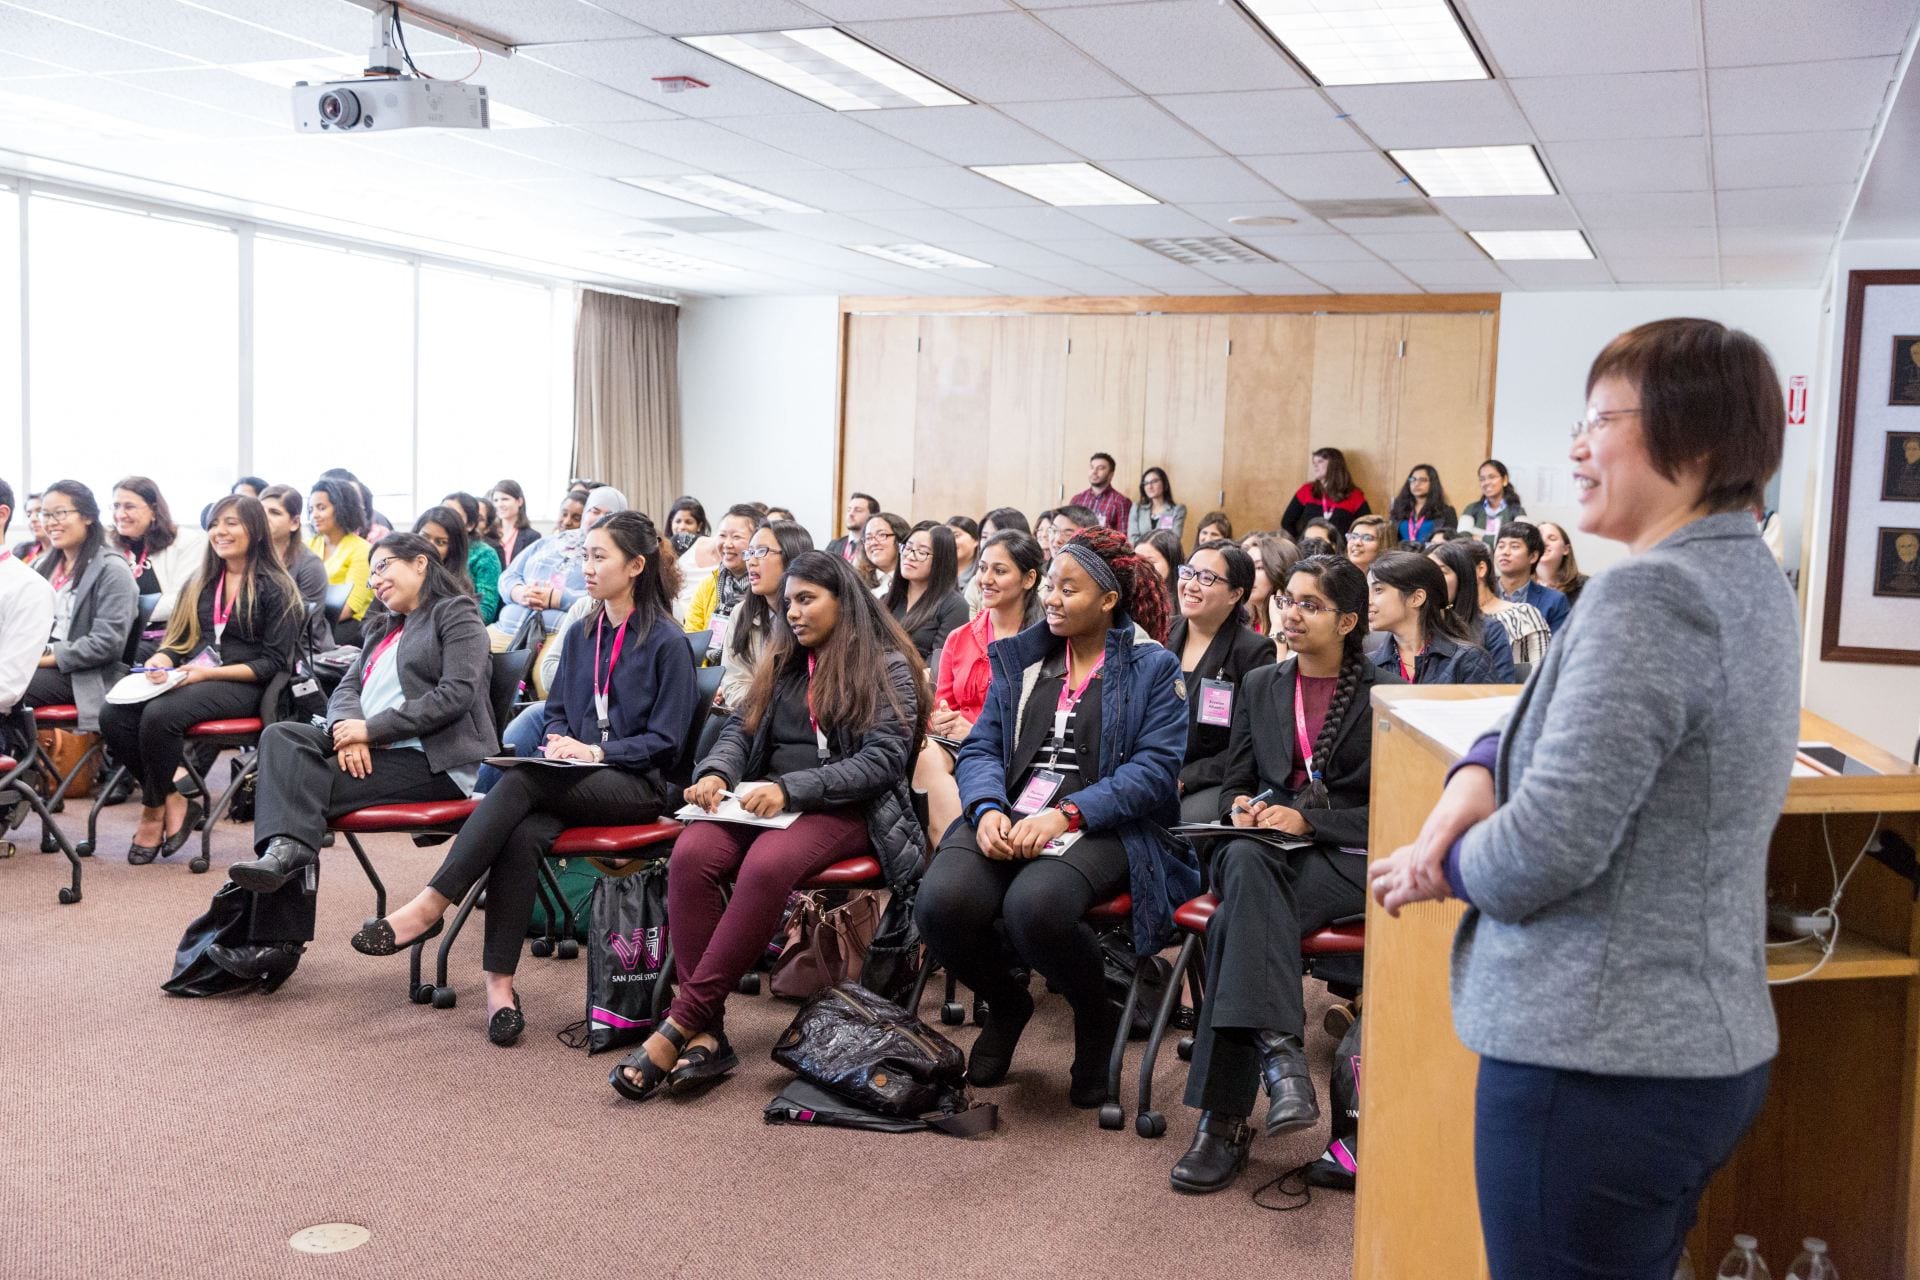 University and community college students listen to women leaders from top technology firms during the Silicon Valley Women in Engineering Conference in 2018. Photo by David Schmitz